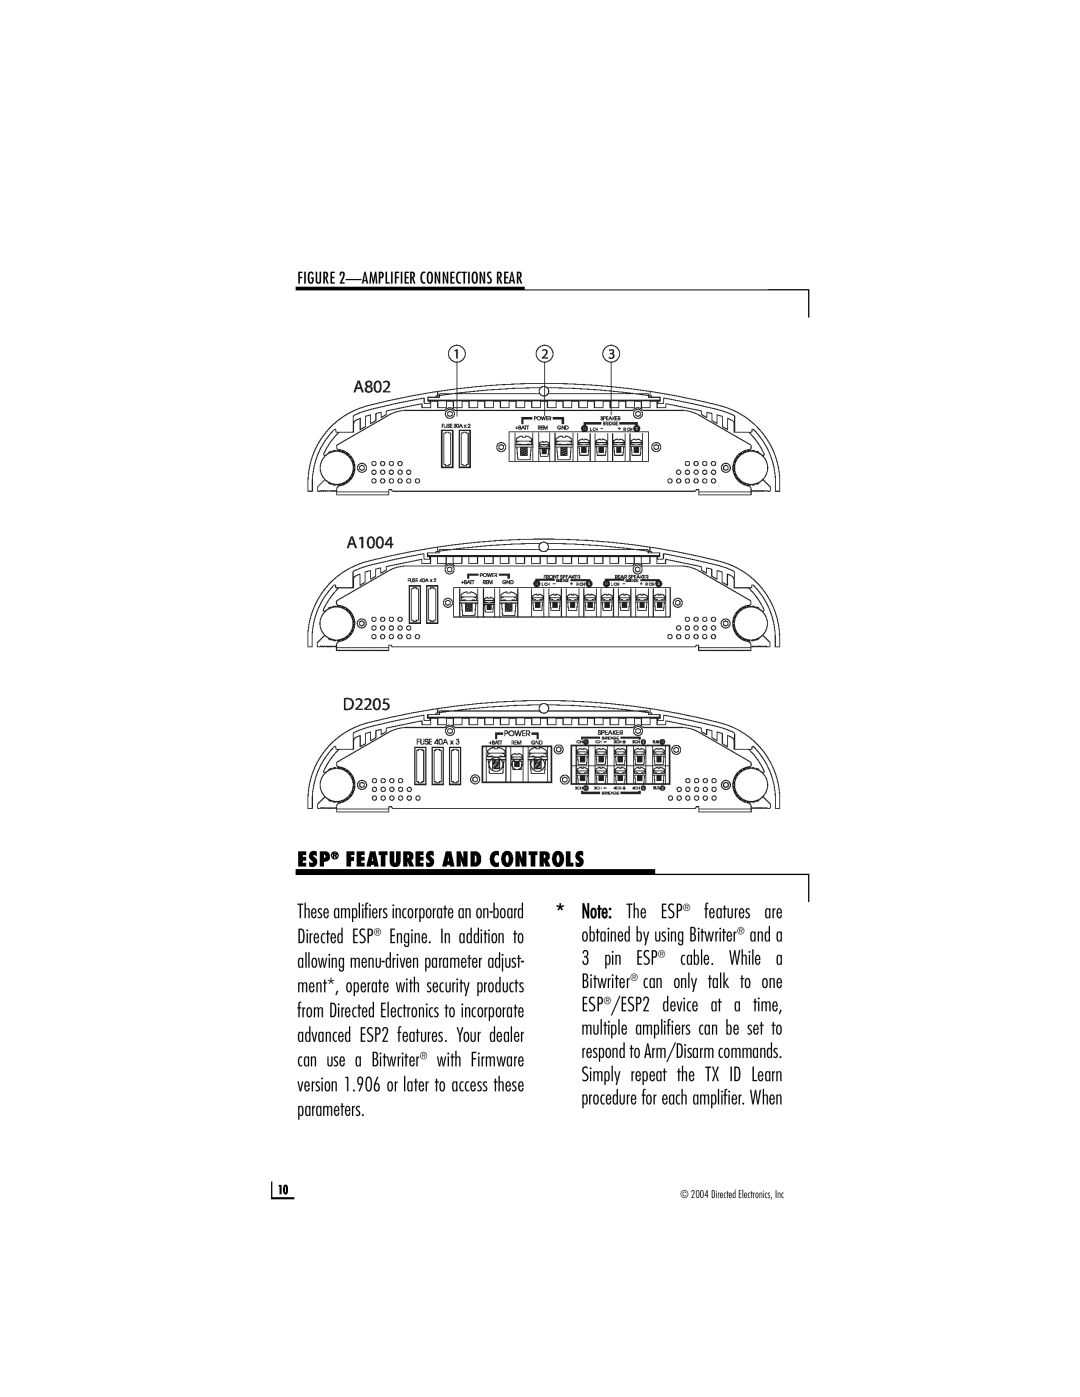 Directed Electronics owner manual Esp Features And Controls, A802 A1004 D2205, Amplifier Connections Rear 